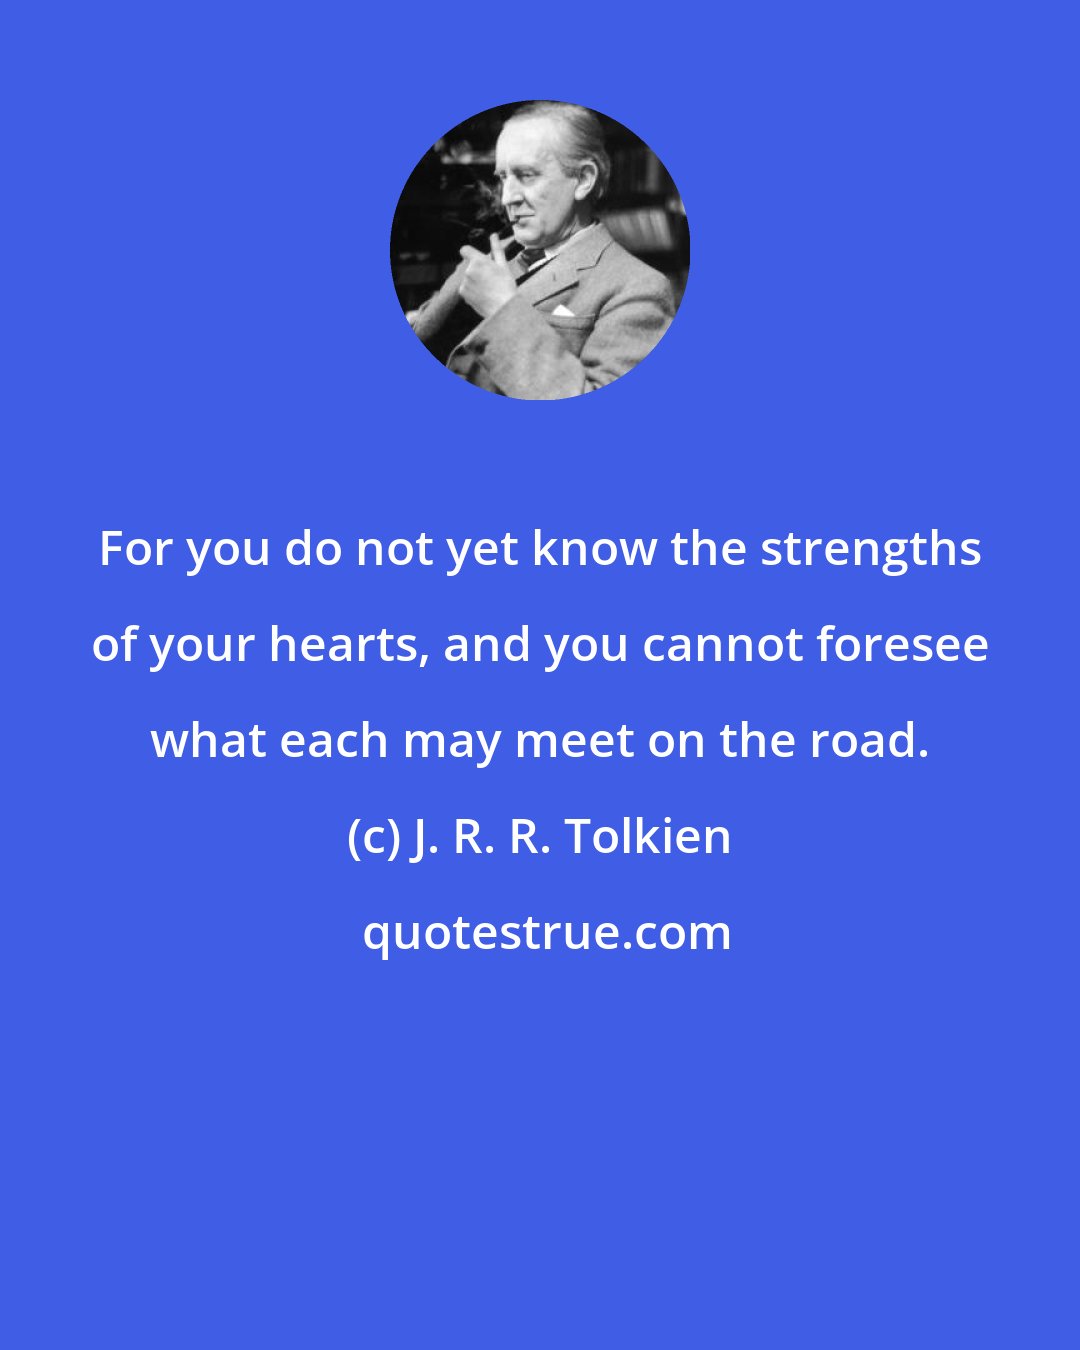 J. R. R. Tolkien: For you do not yet know the strengths of your hearts, and you cannot foresee what each may meet on the road.